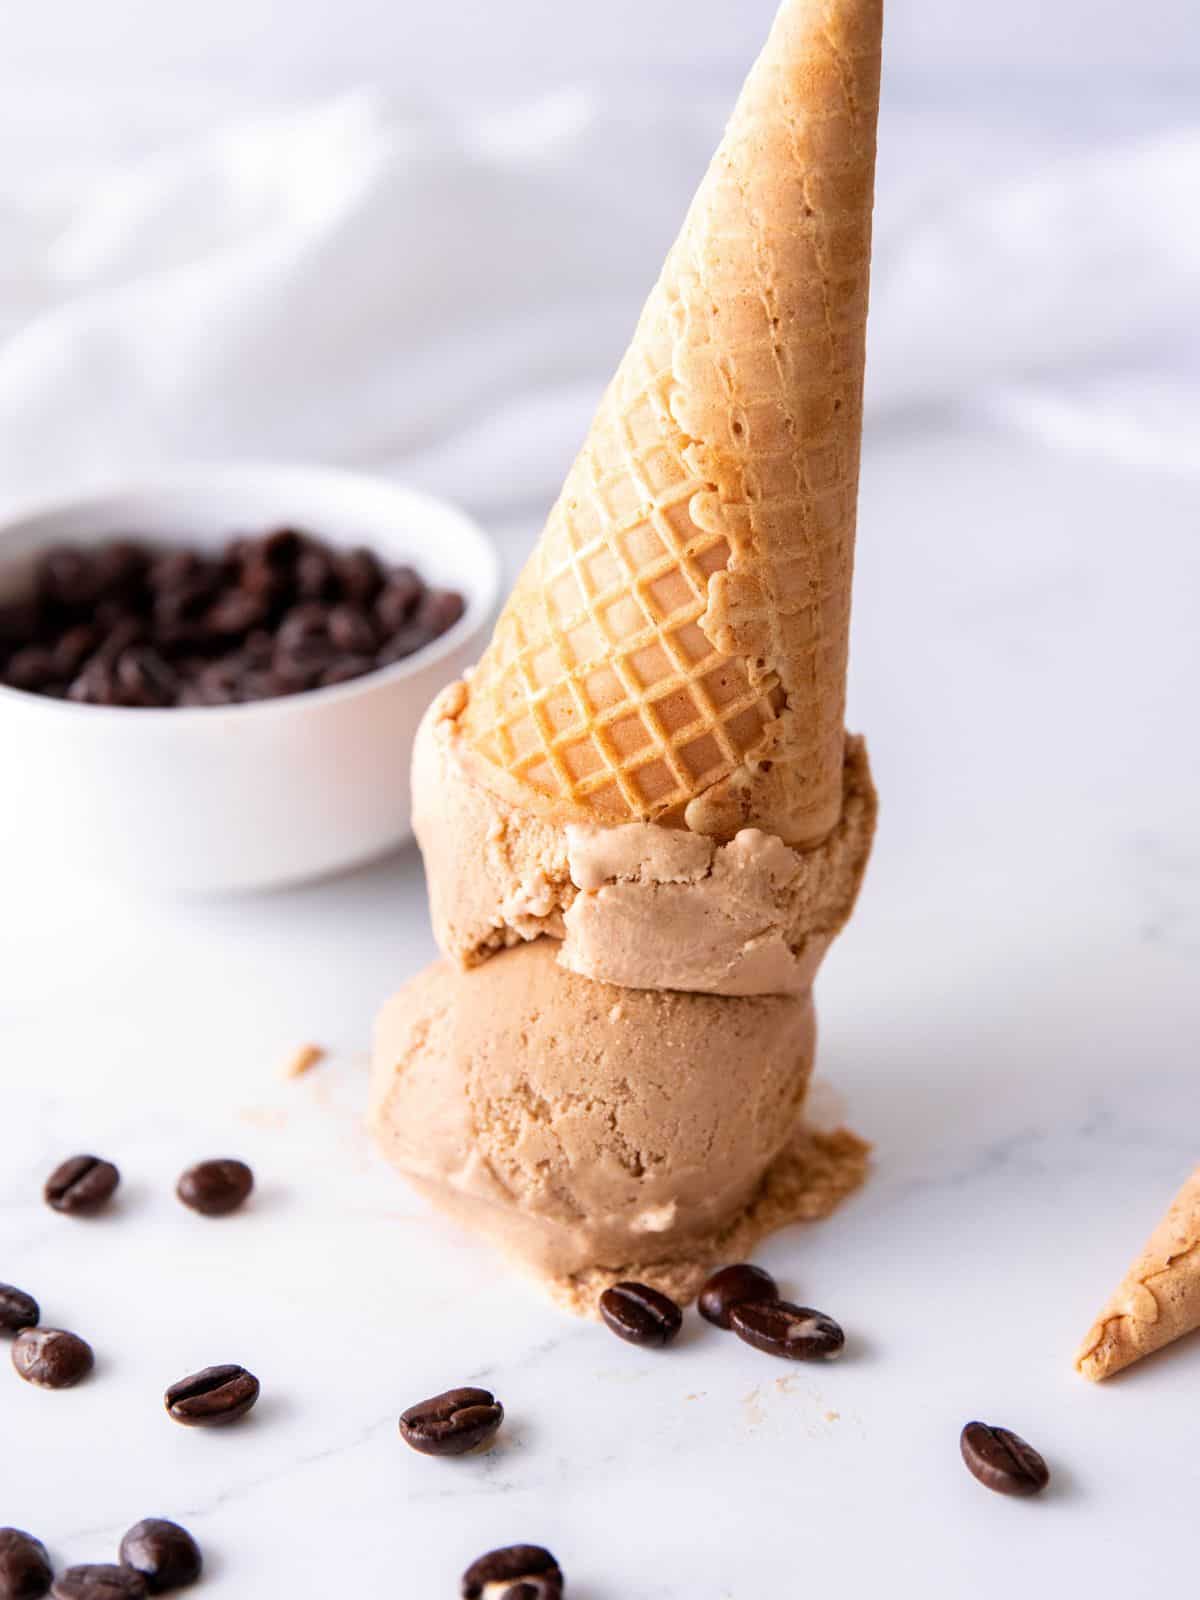 hero shot of coffee ice cream with two scoops on a cone that has been inverted on a table.